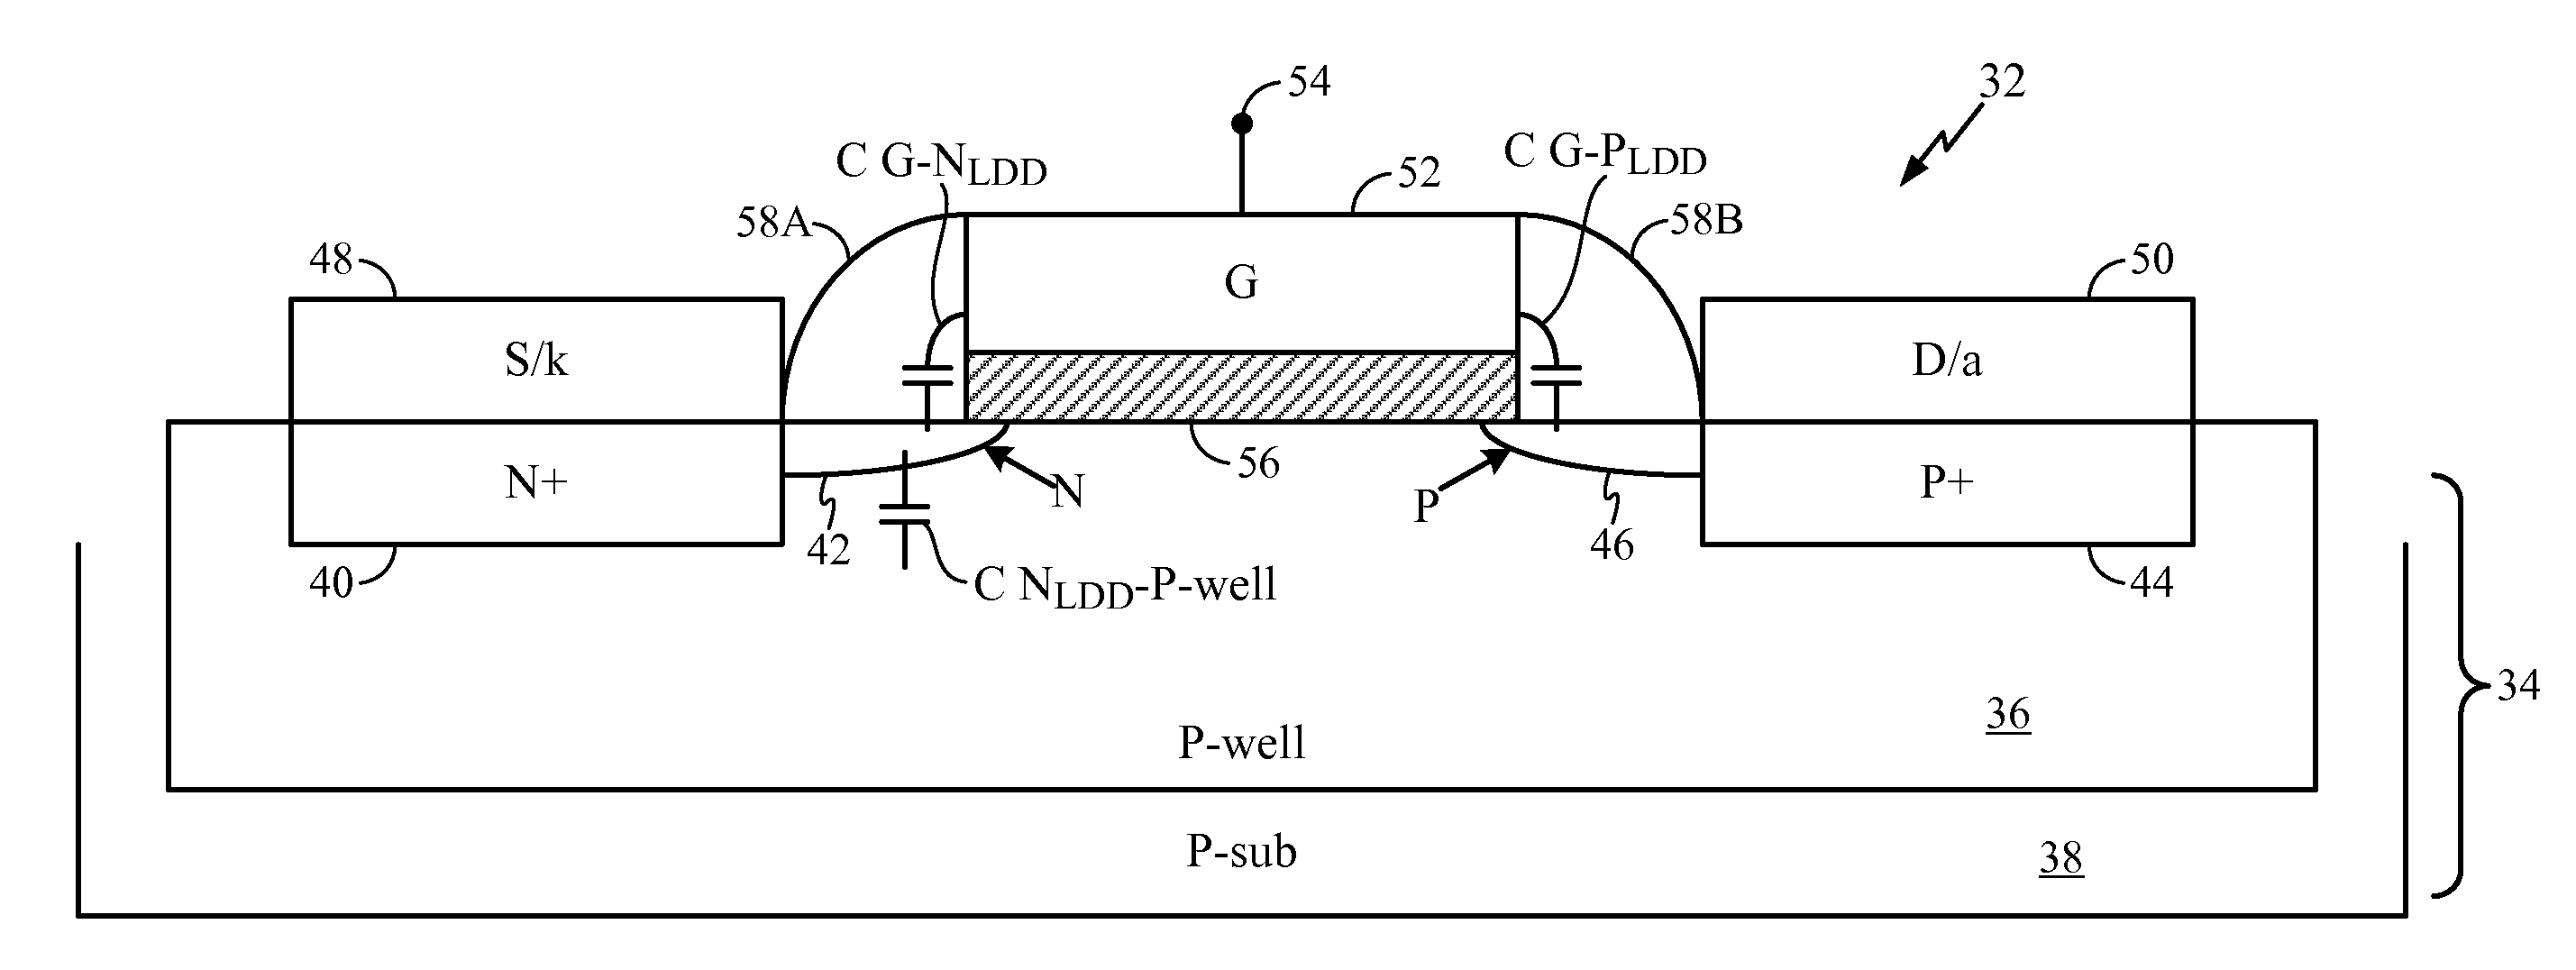 Gated diode having at least one lightly-doped drain (LDD) implant blocked and circuits and methods employing same